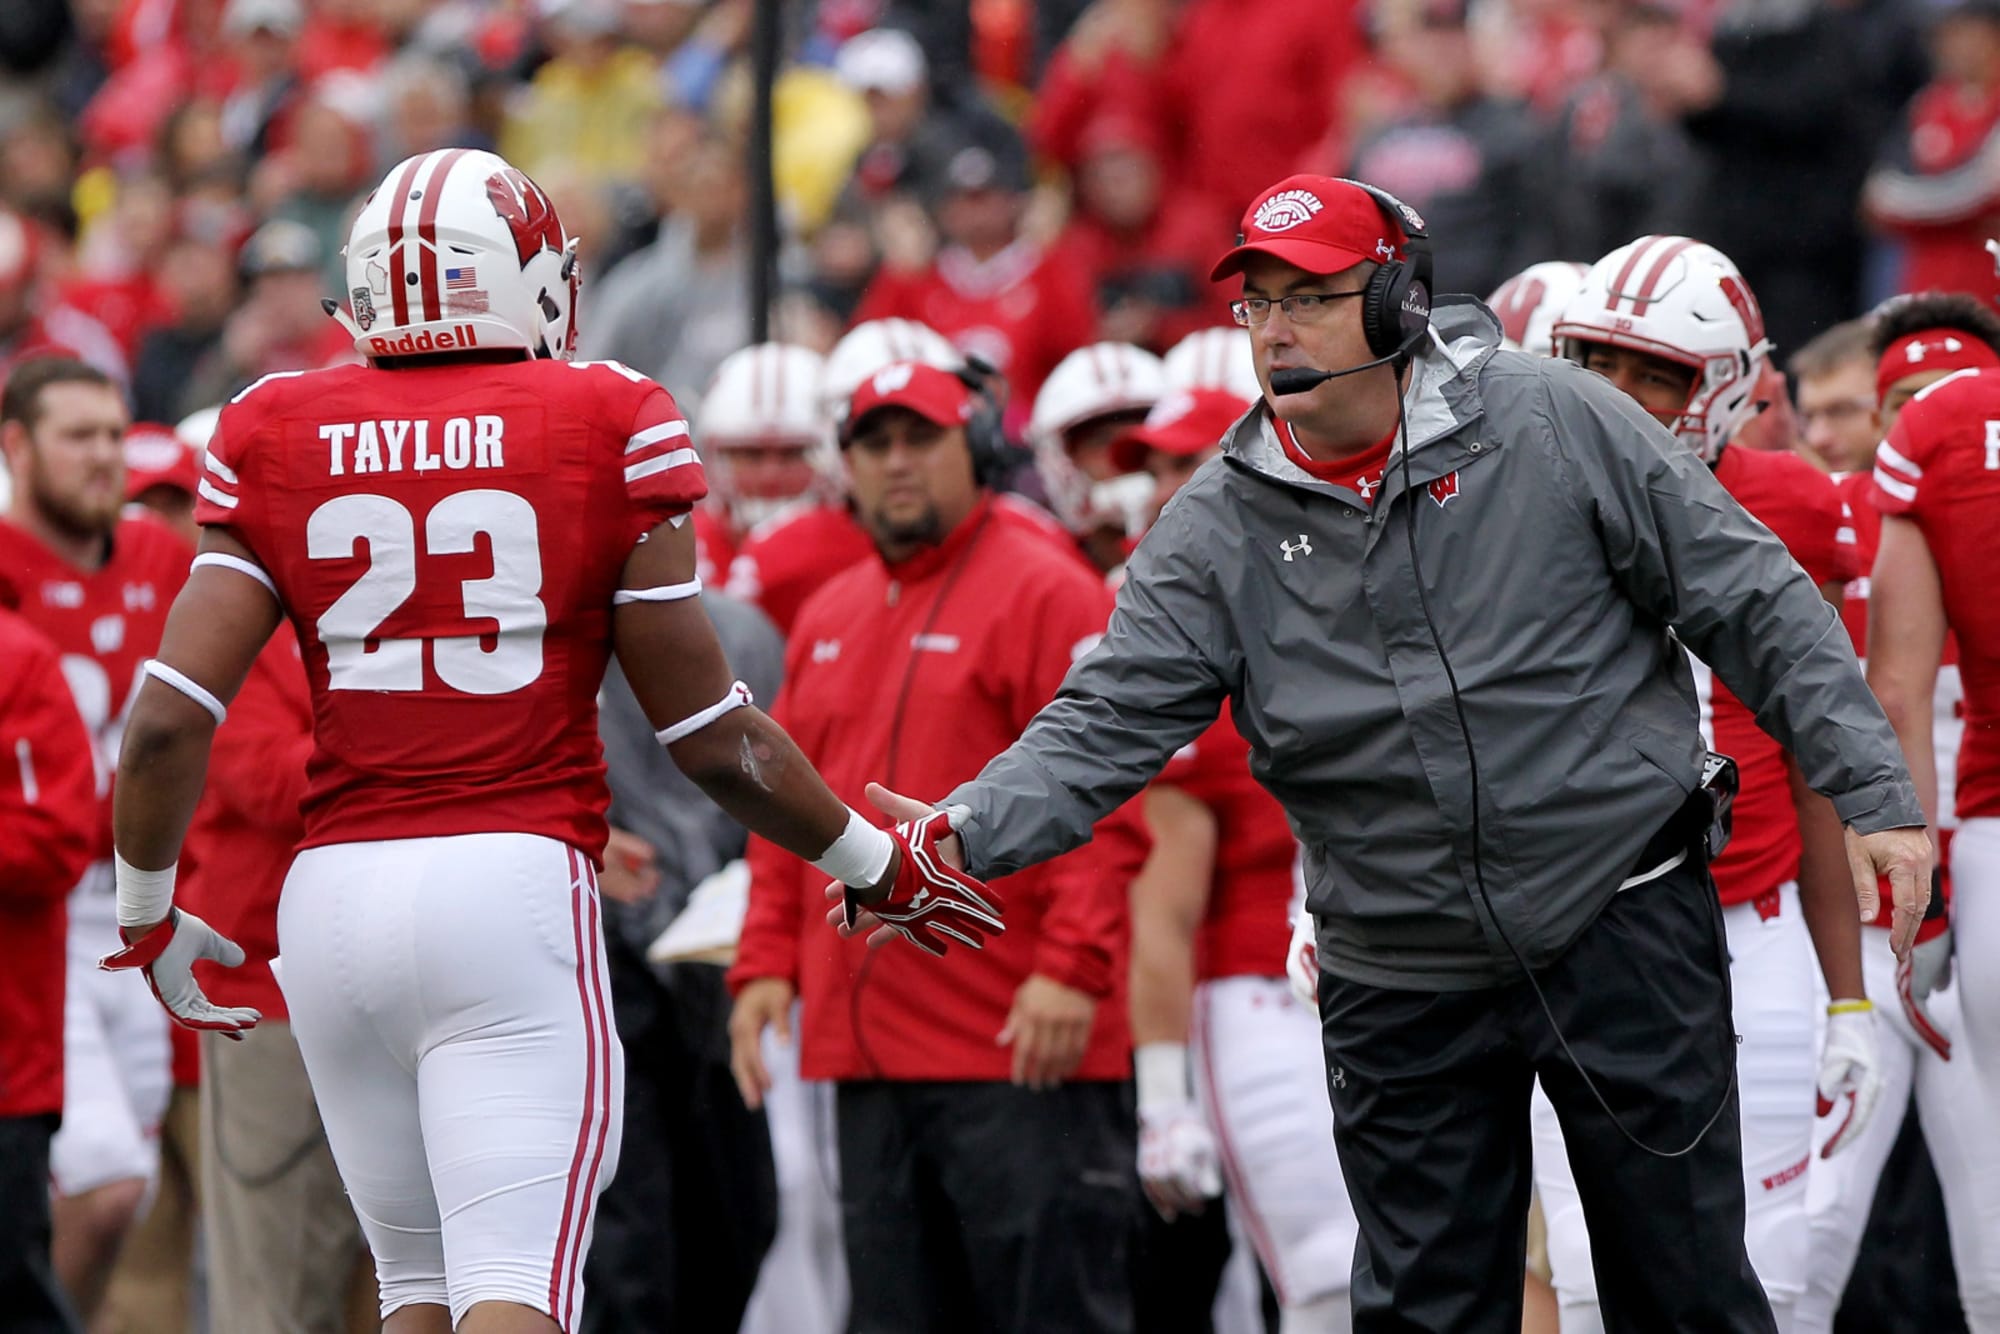 5 reasons Wisconsin makes the College Football Playoff